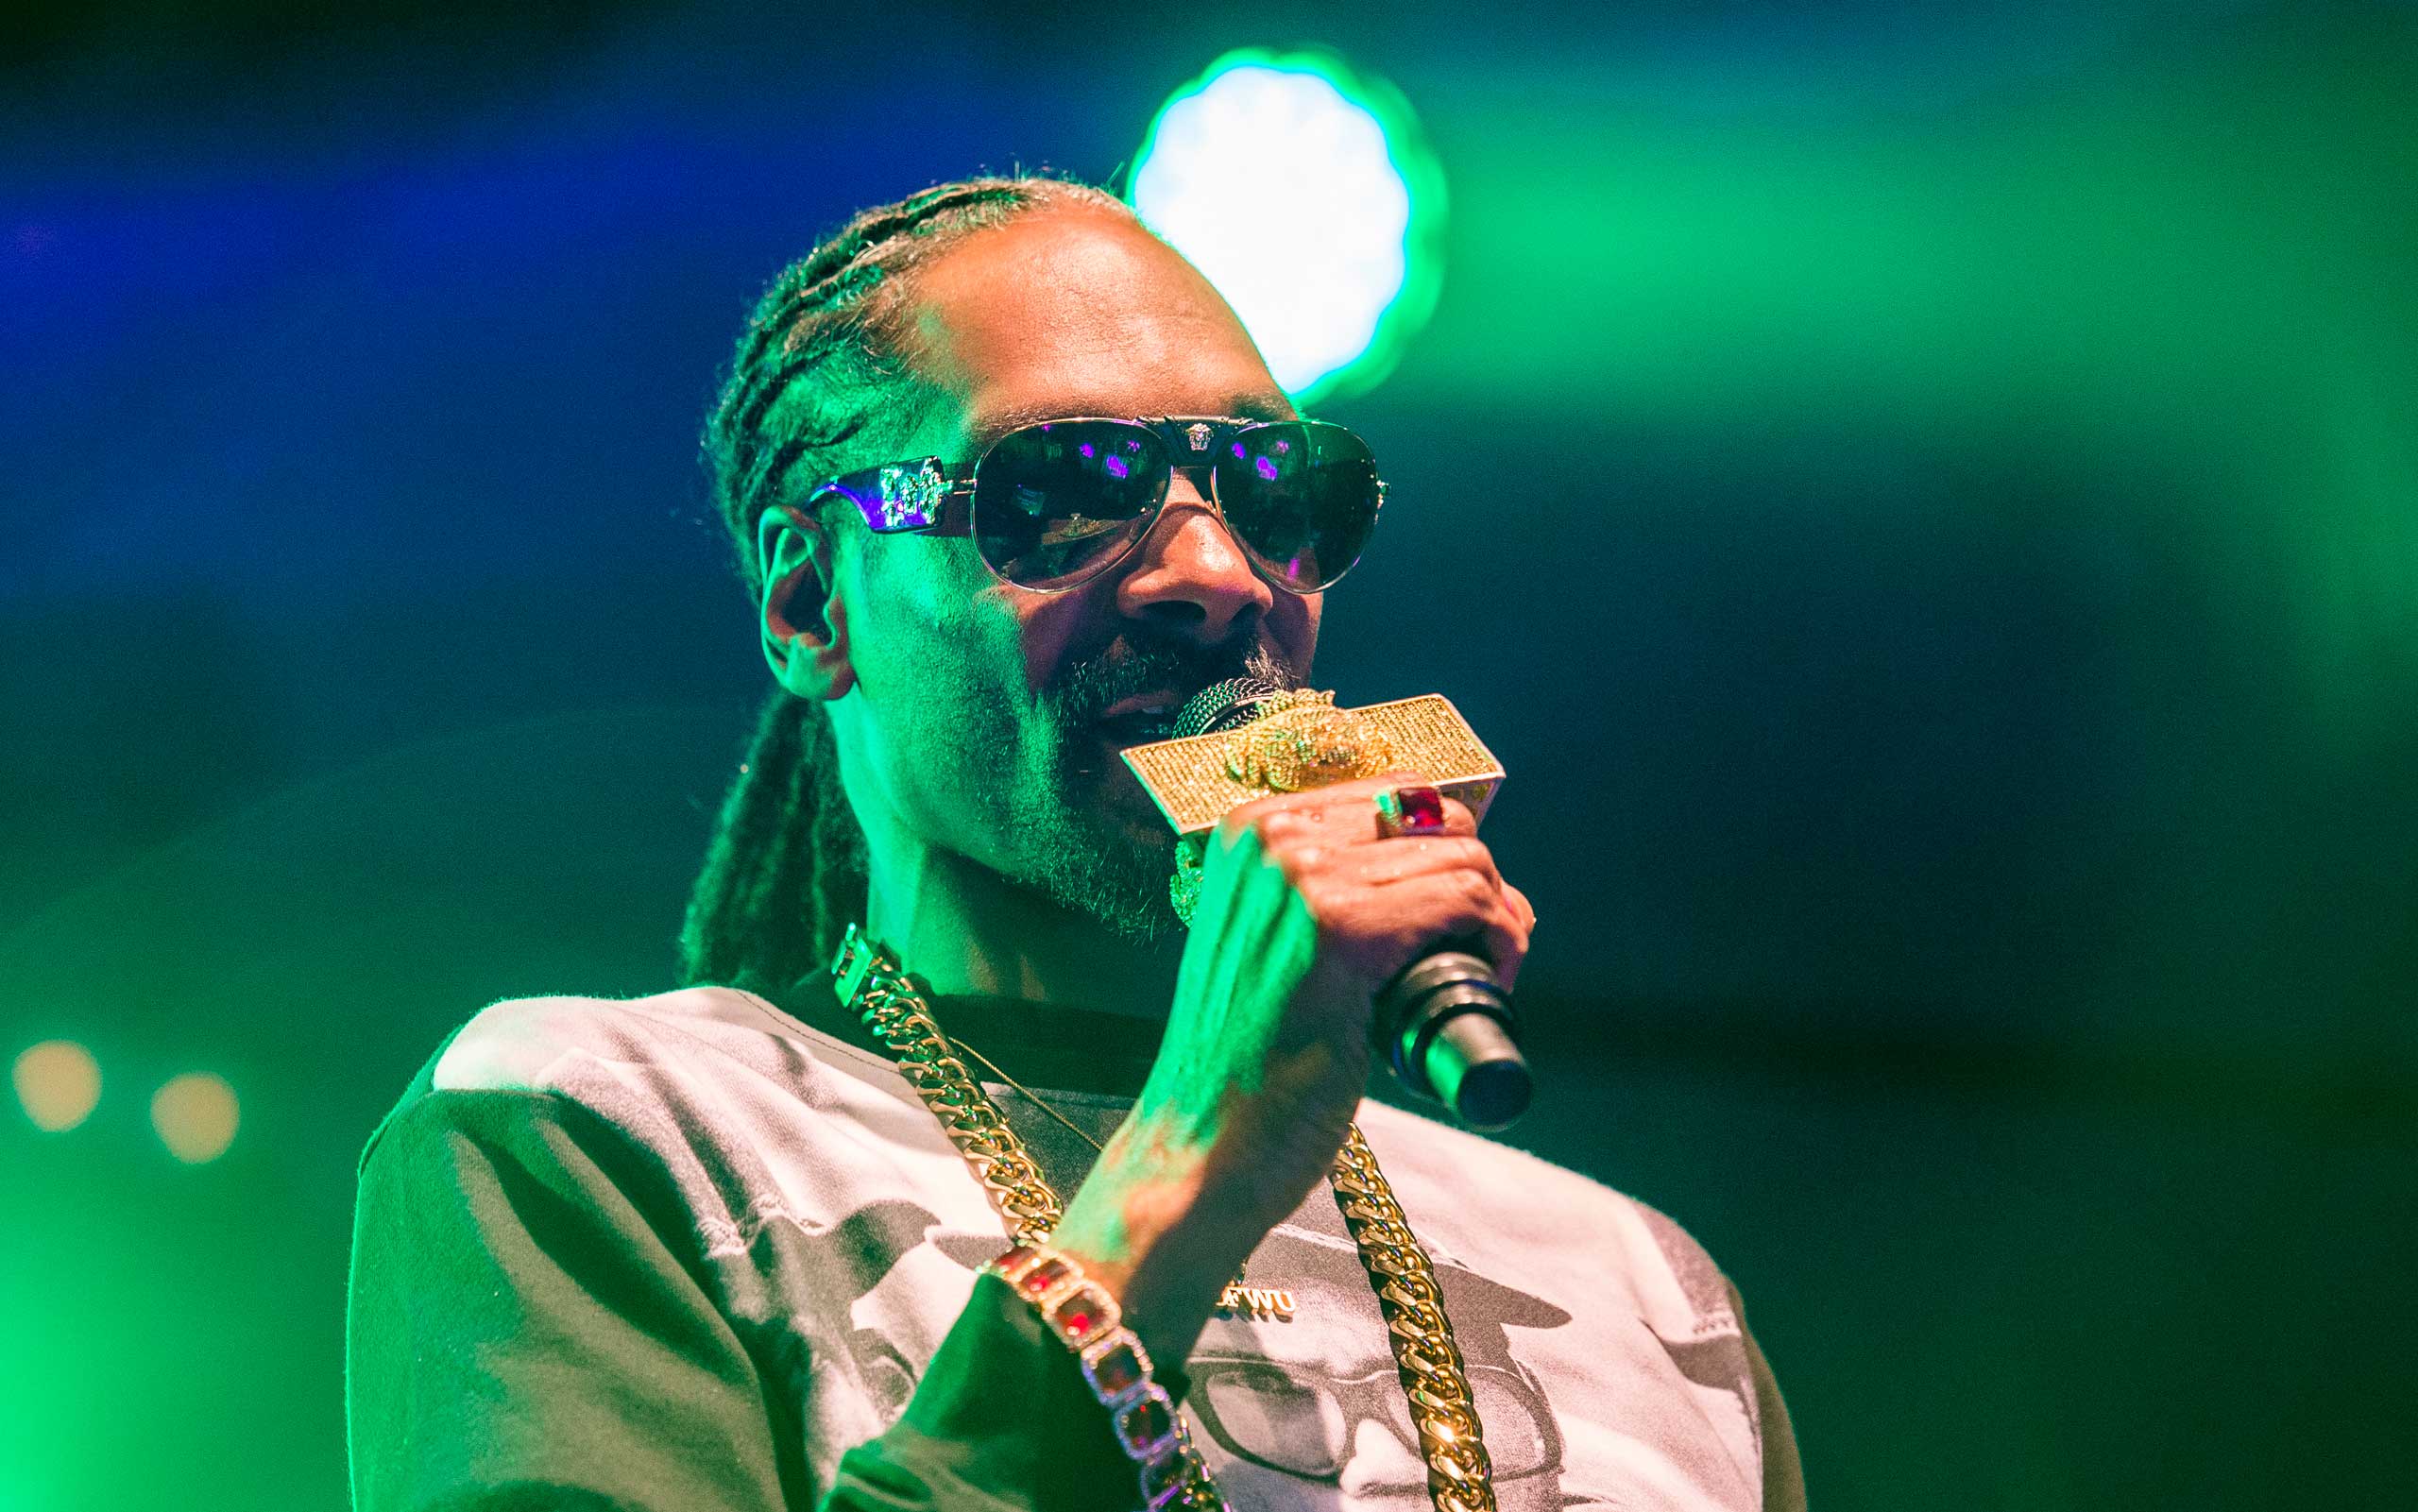 US rapper Snoop Dogg performing in Uppsala, Sweden, on July 25, 2015. (Marcus Ericsson—EPA)